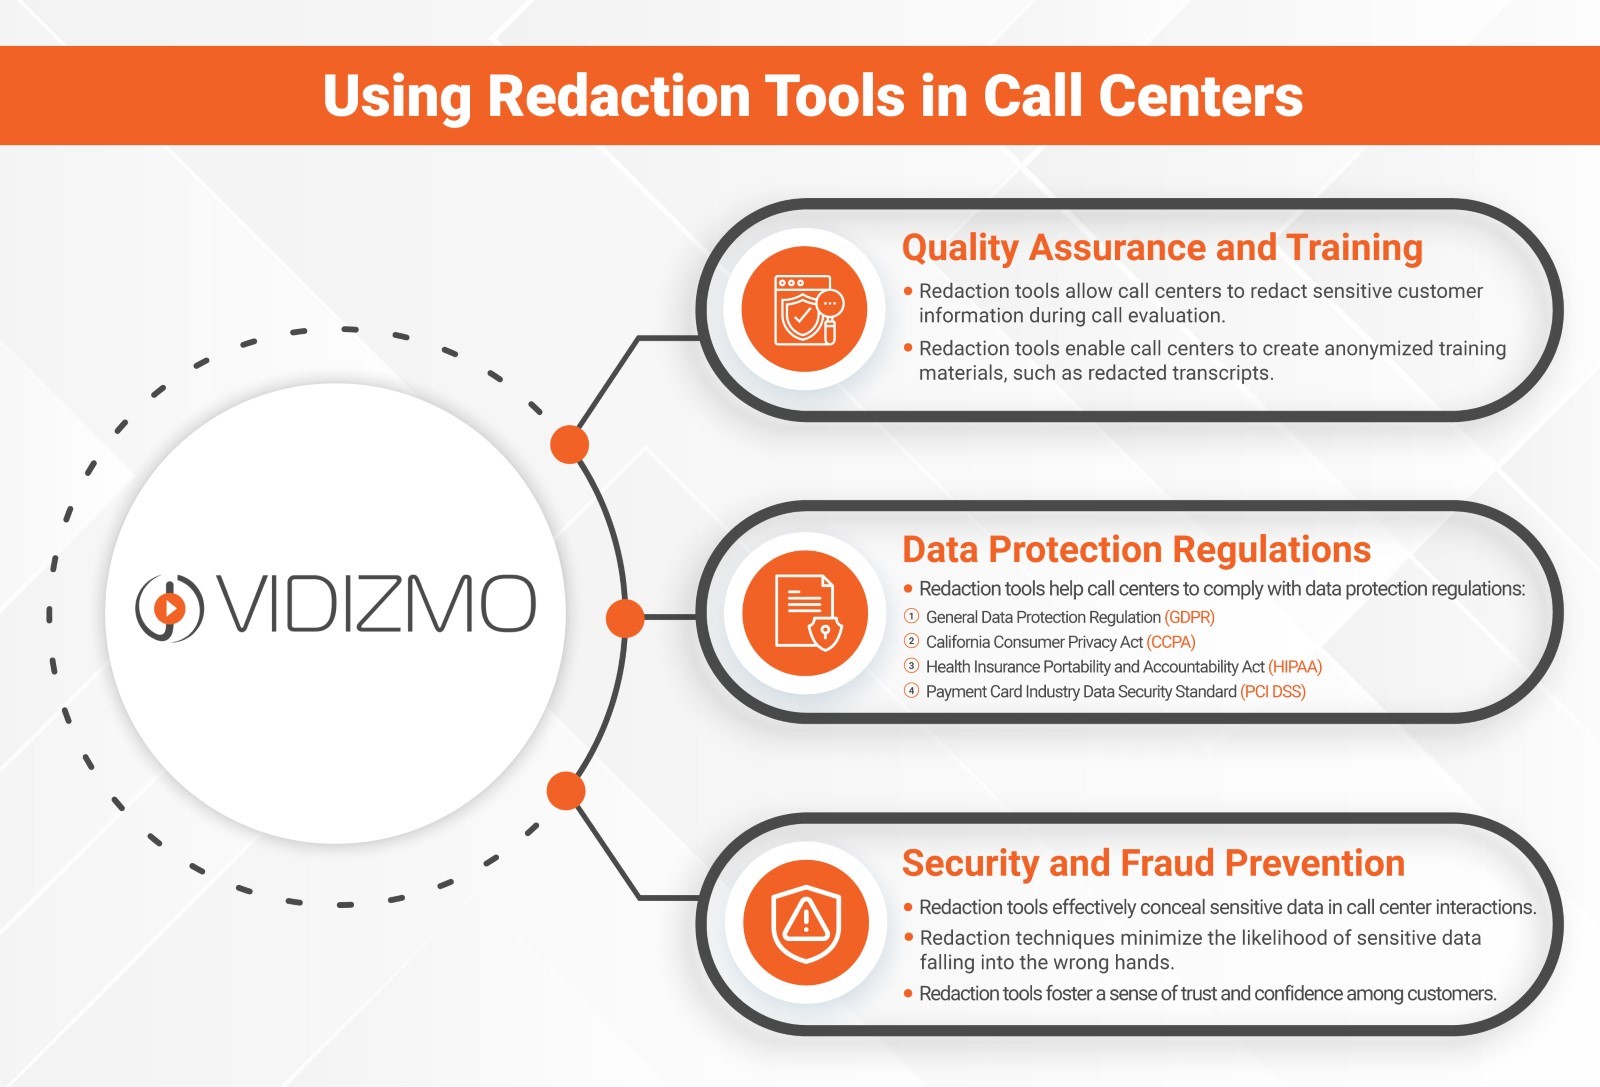 Use Cases of Redaction Tools in Call Centers
Use Cases of Redaction Tools in Call Centers
